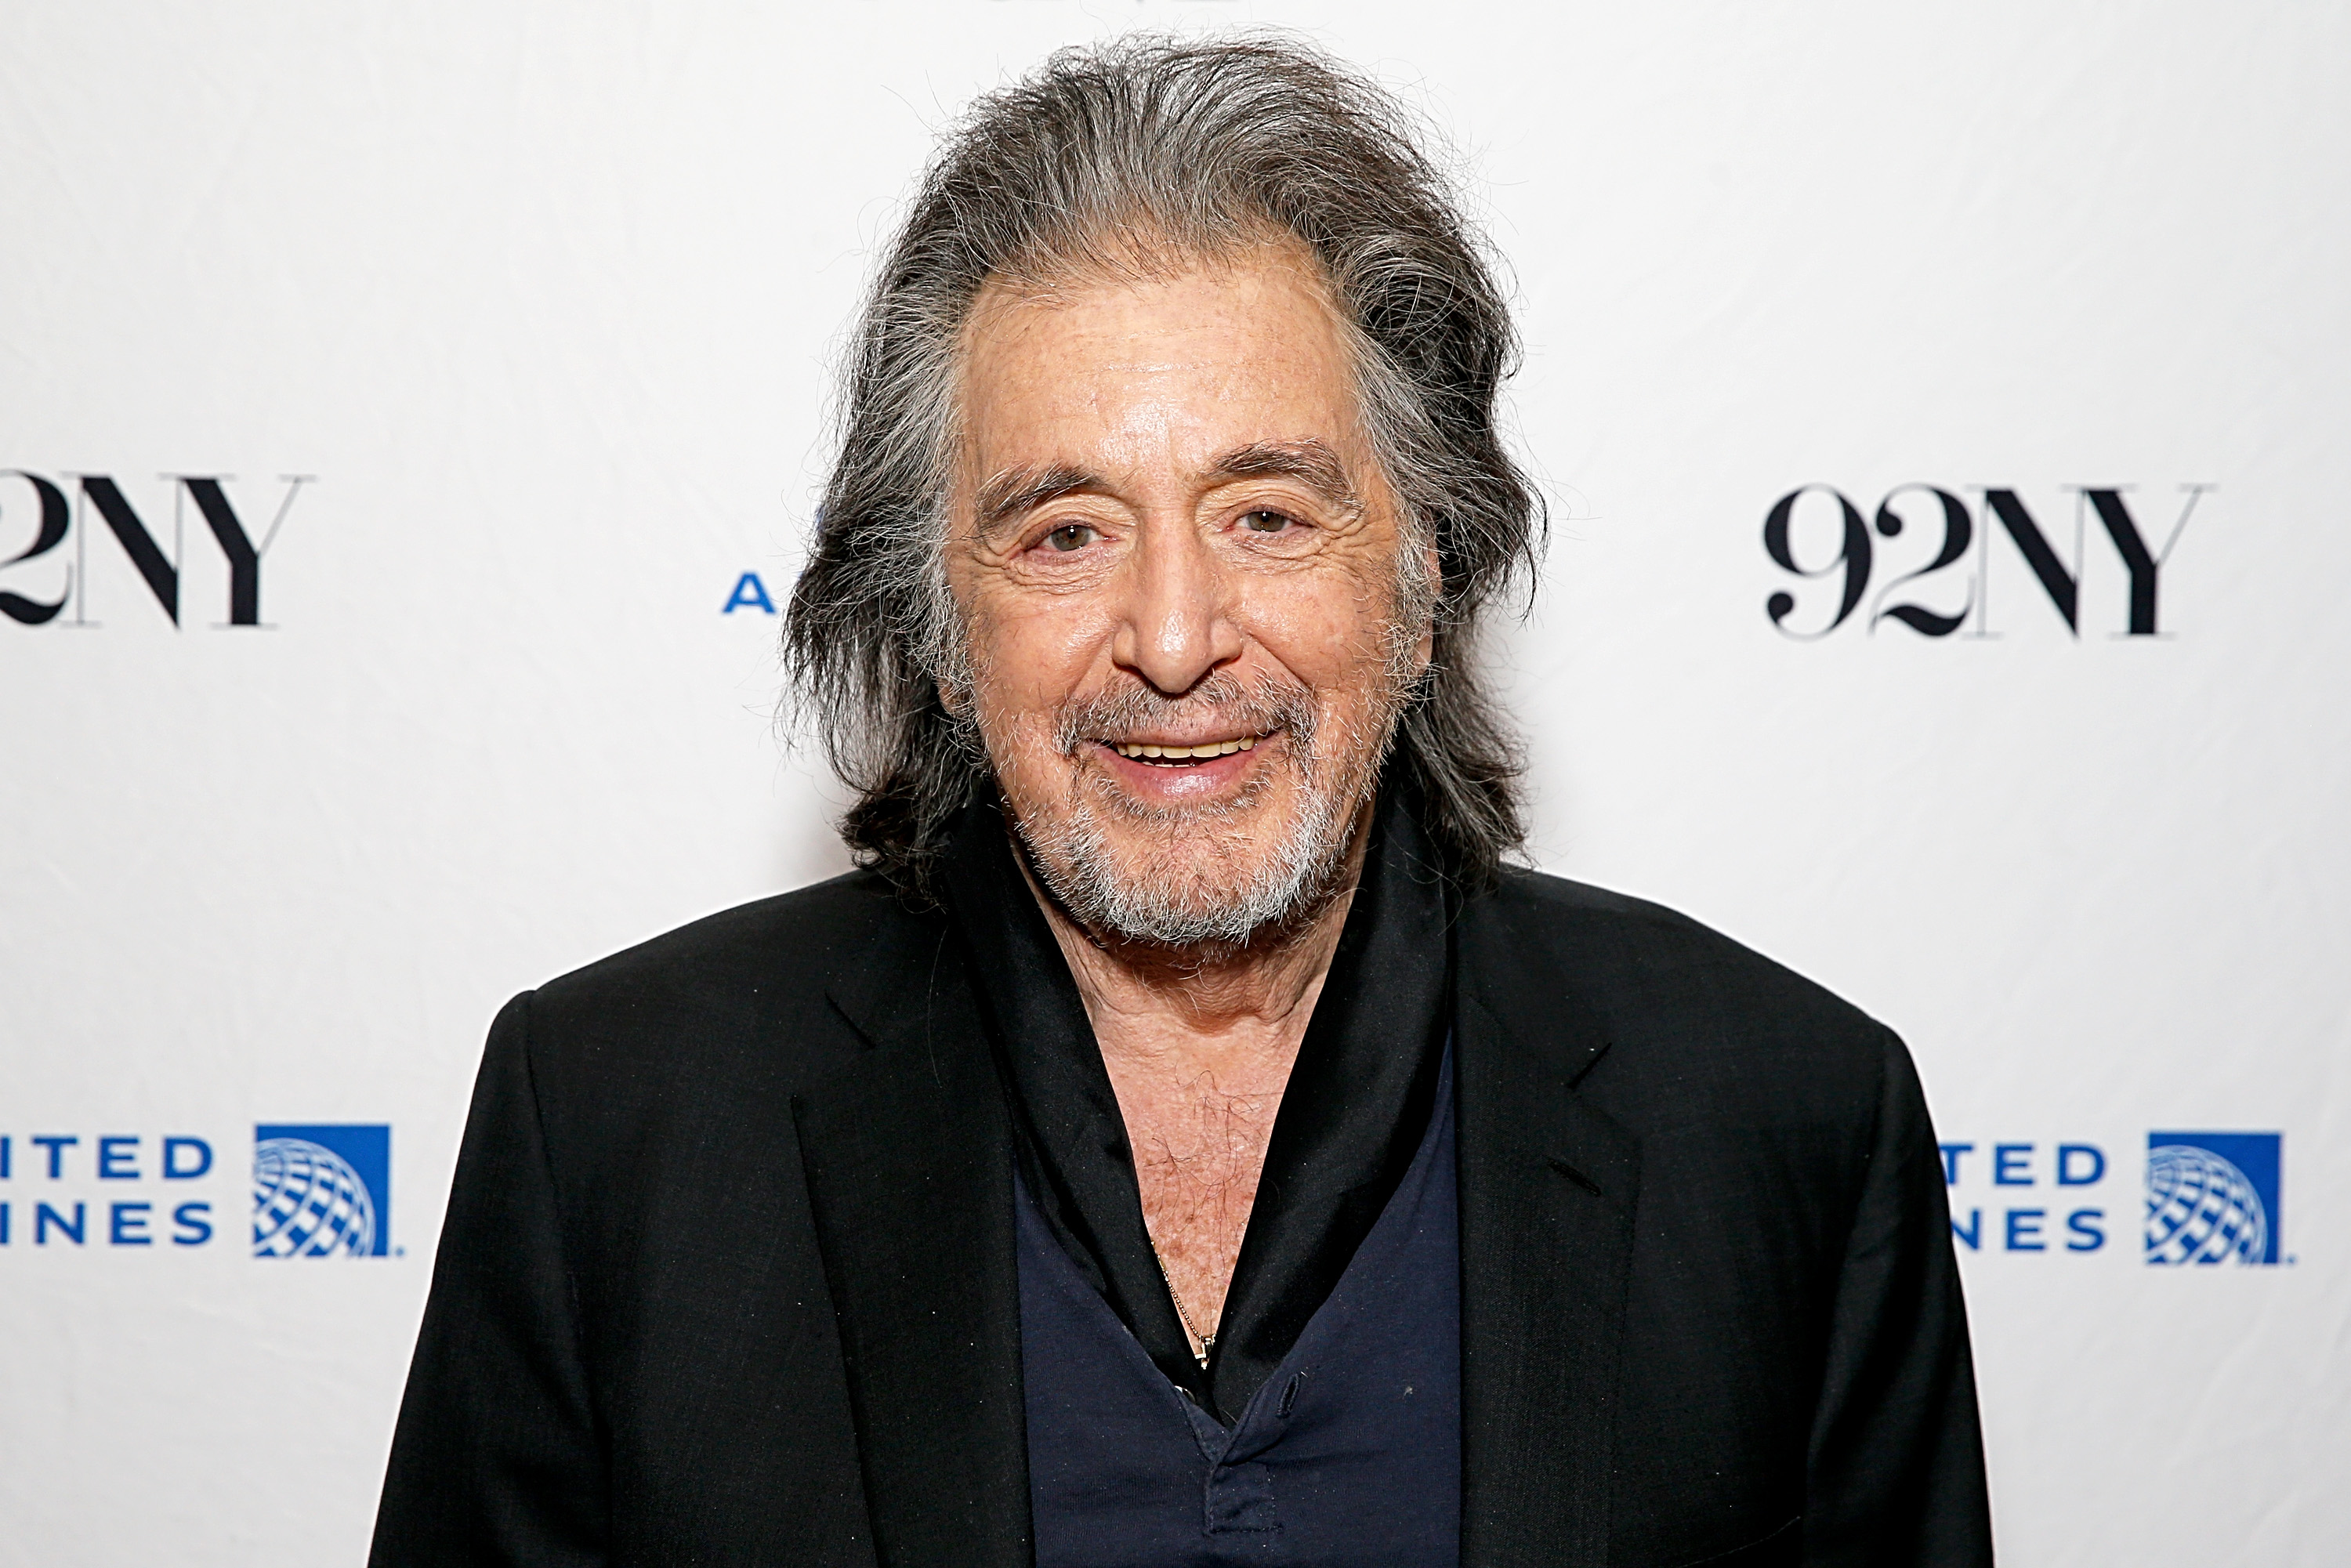 Al Pacino at The 92nd Street Y in New York City on April 19, 2023. | Source: Getty Images